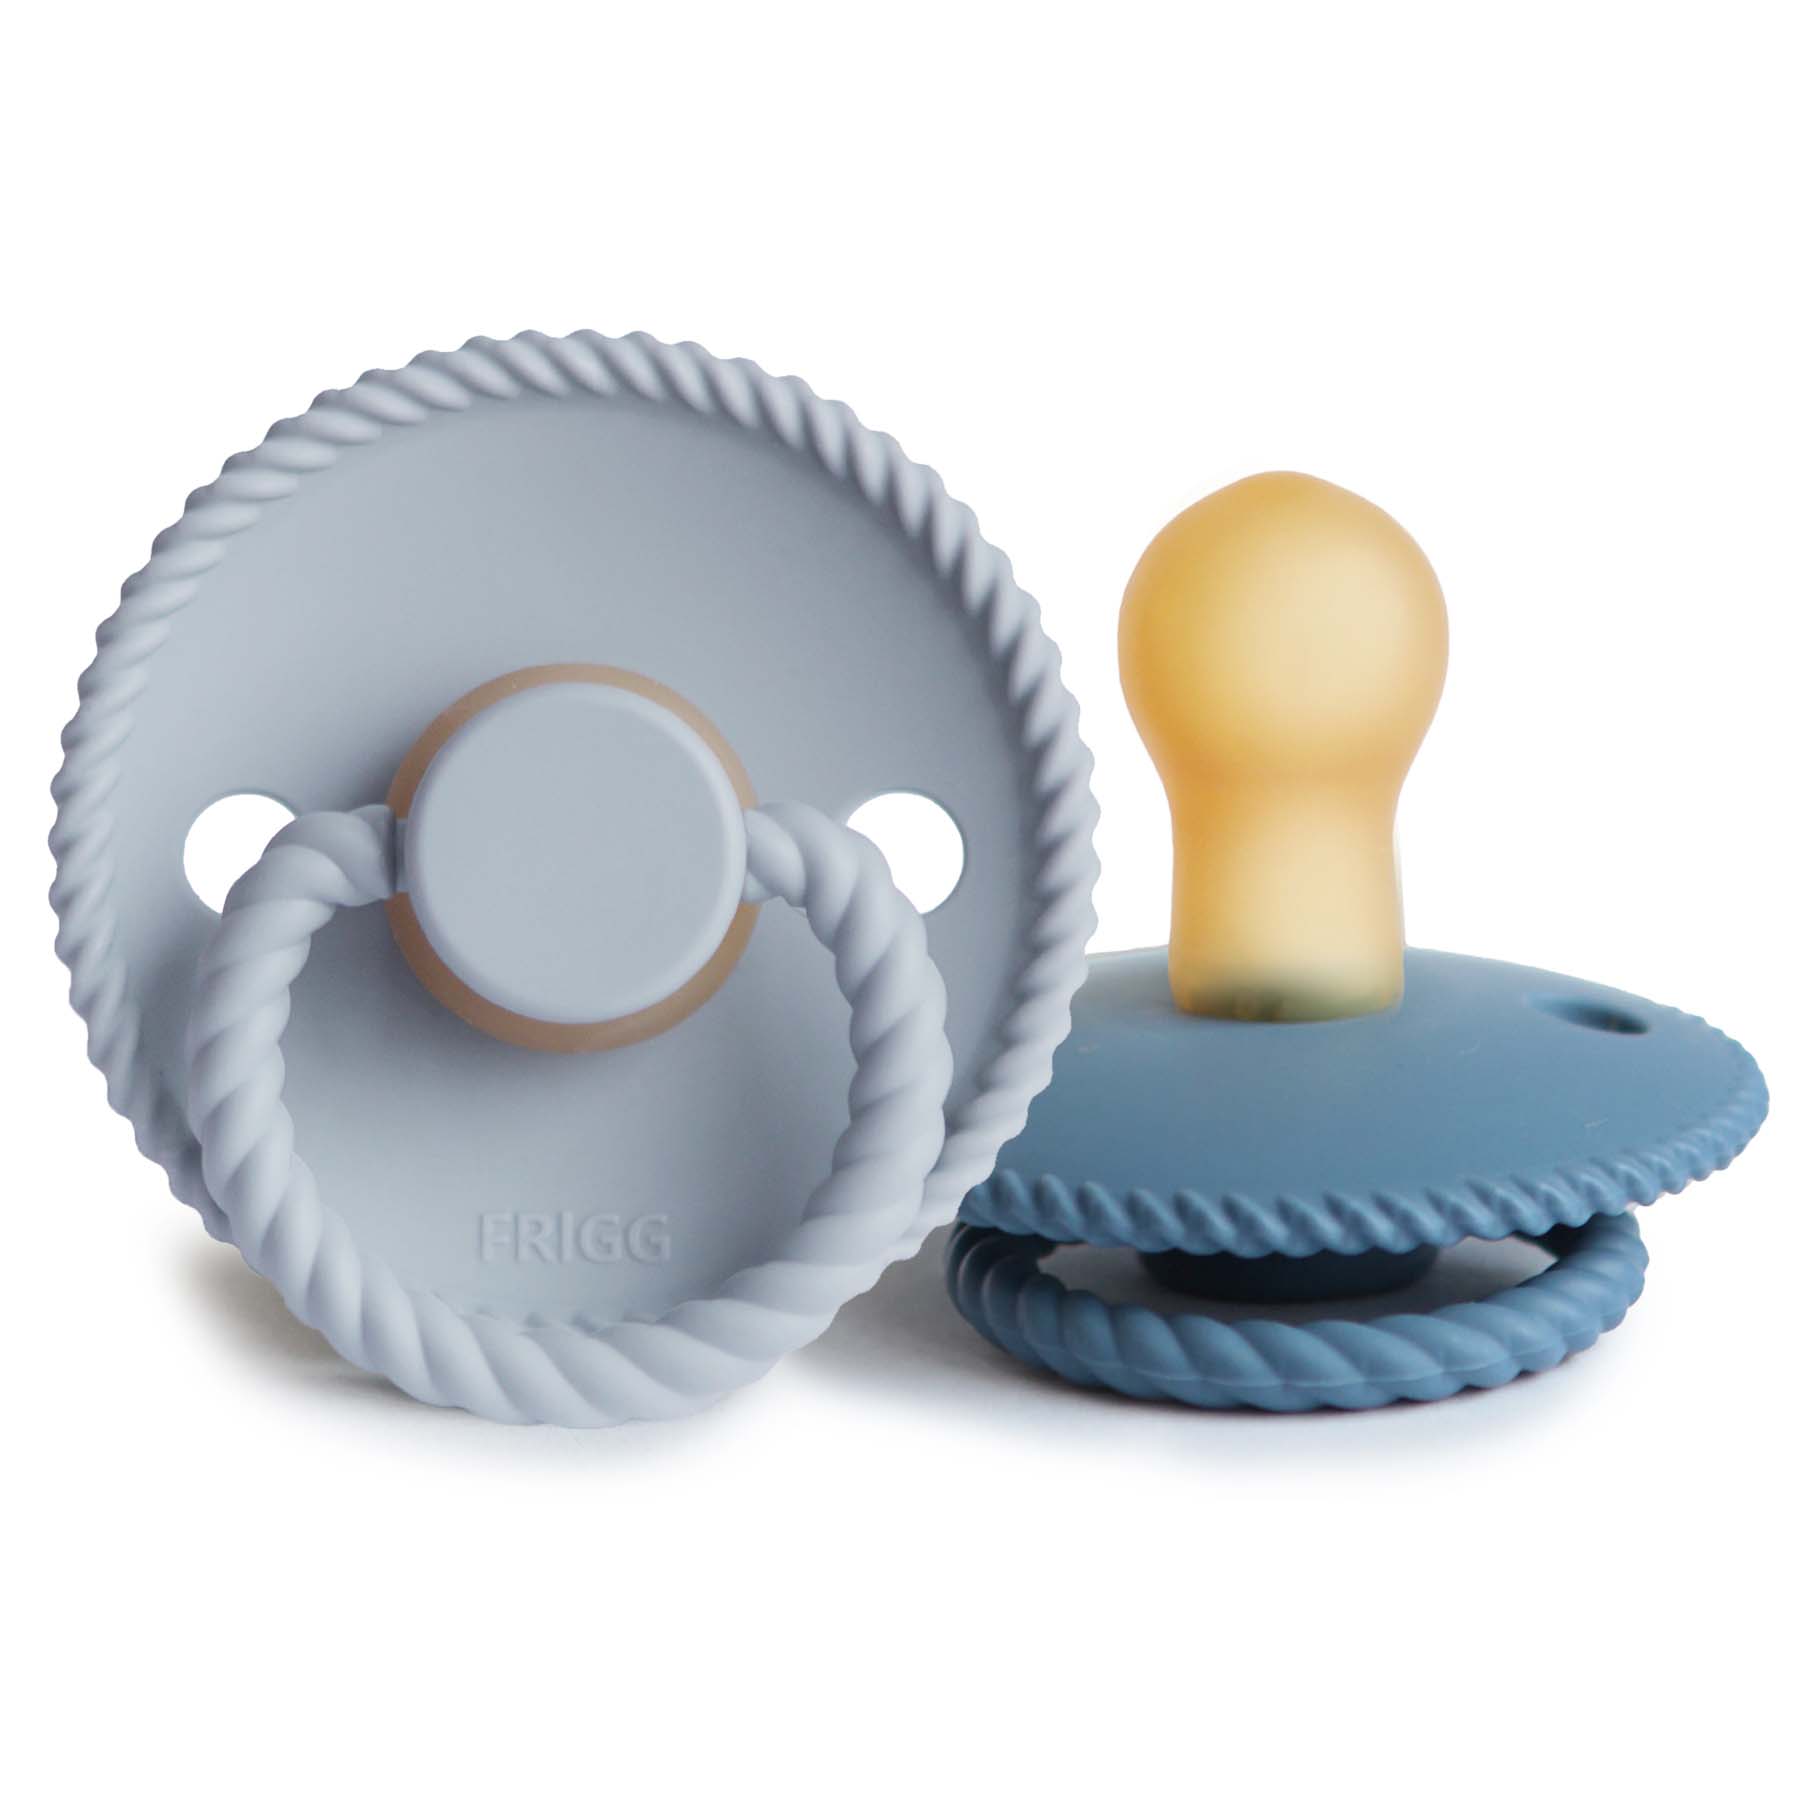 Mushie Soother FRIGG Rope Natural Rubber Baby Pacifier (Powder Blue / Ocean View) 2-Pack